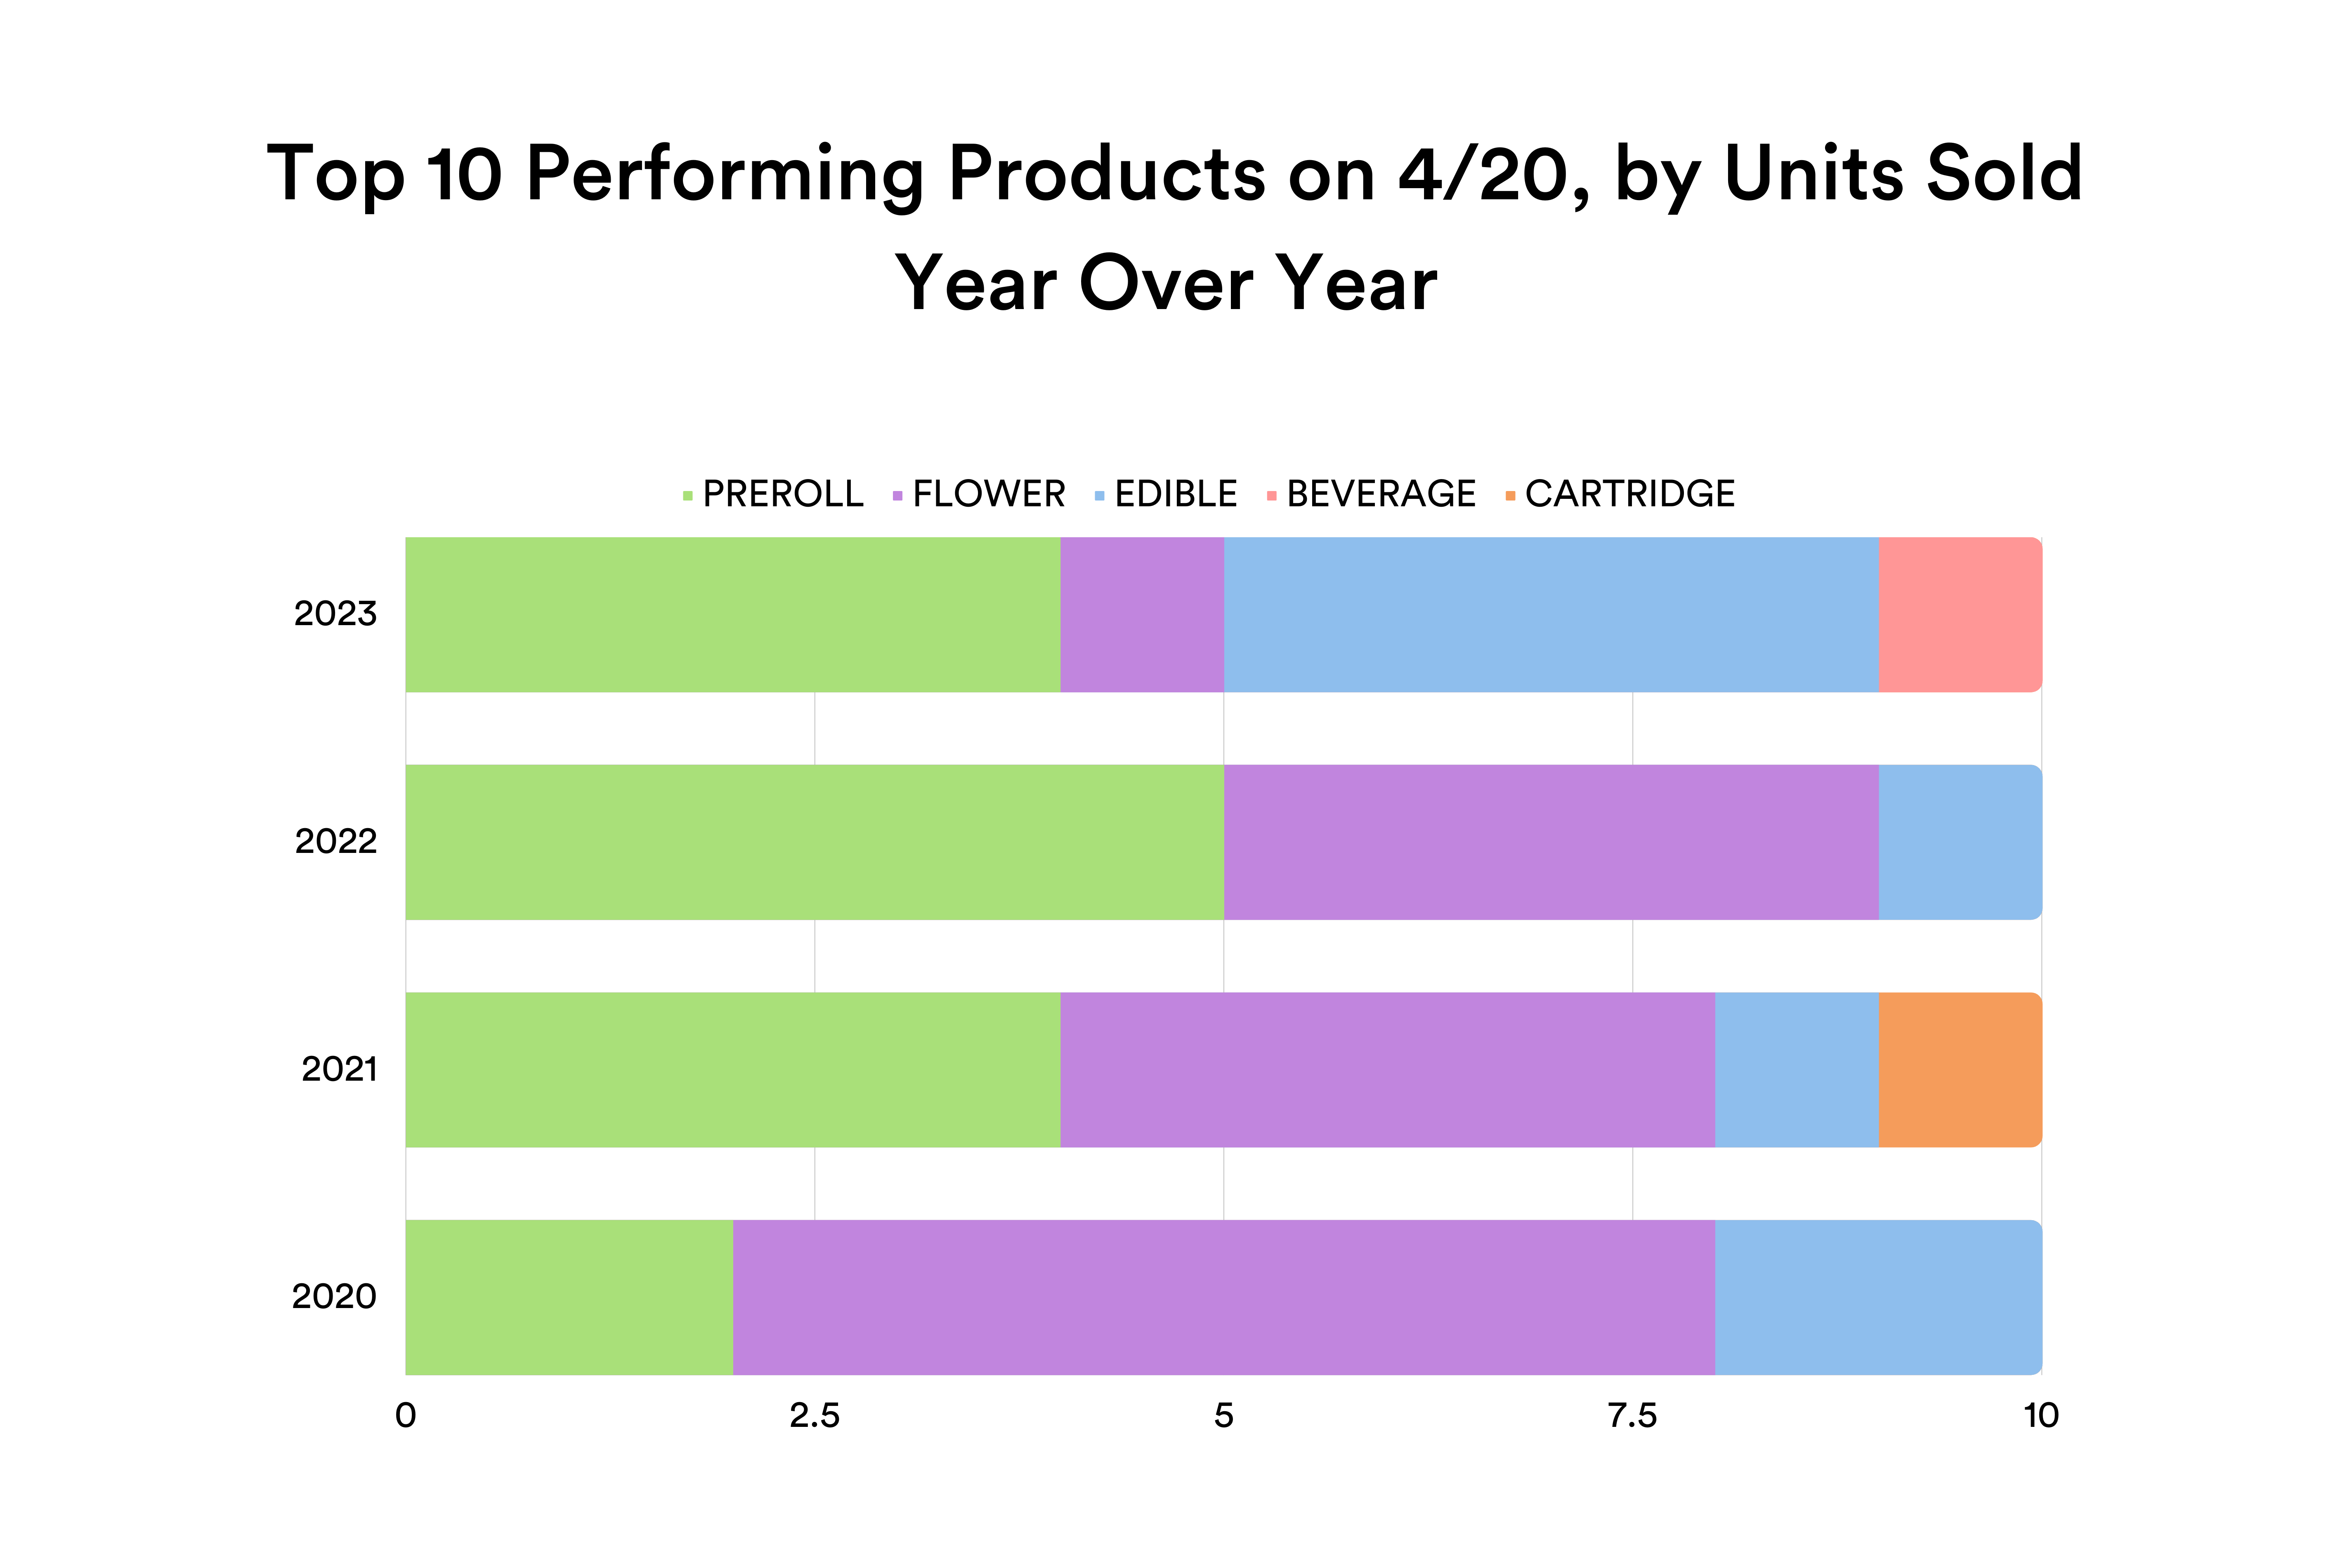 Top 10 Performing Products Year Over Year by Units Sold